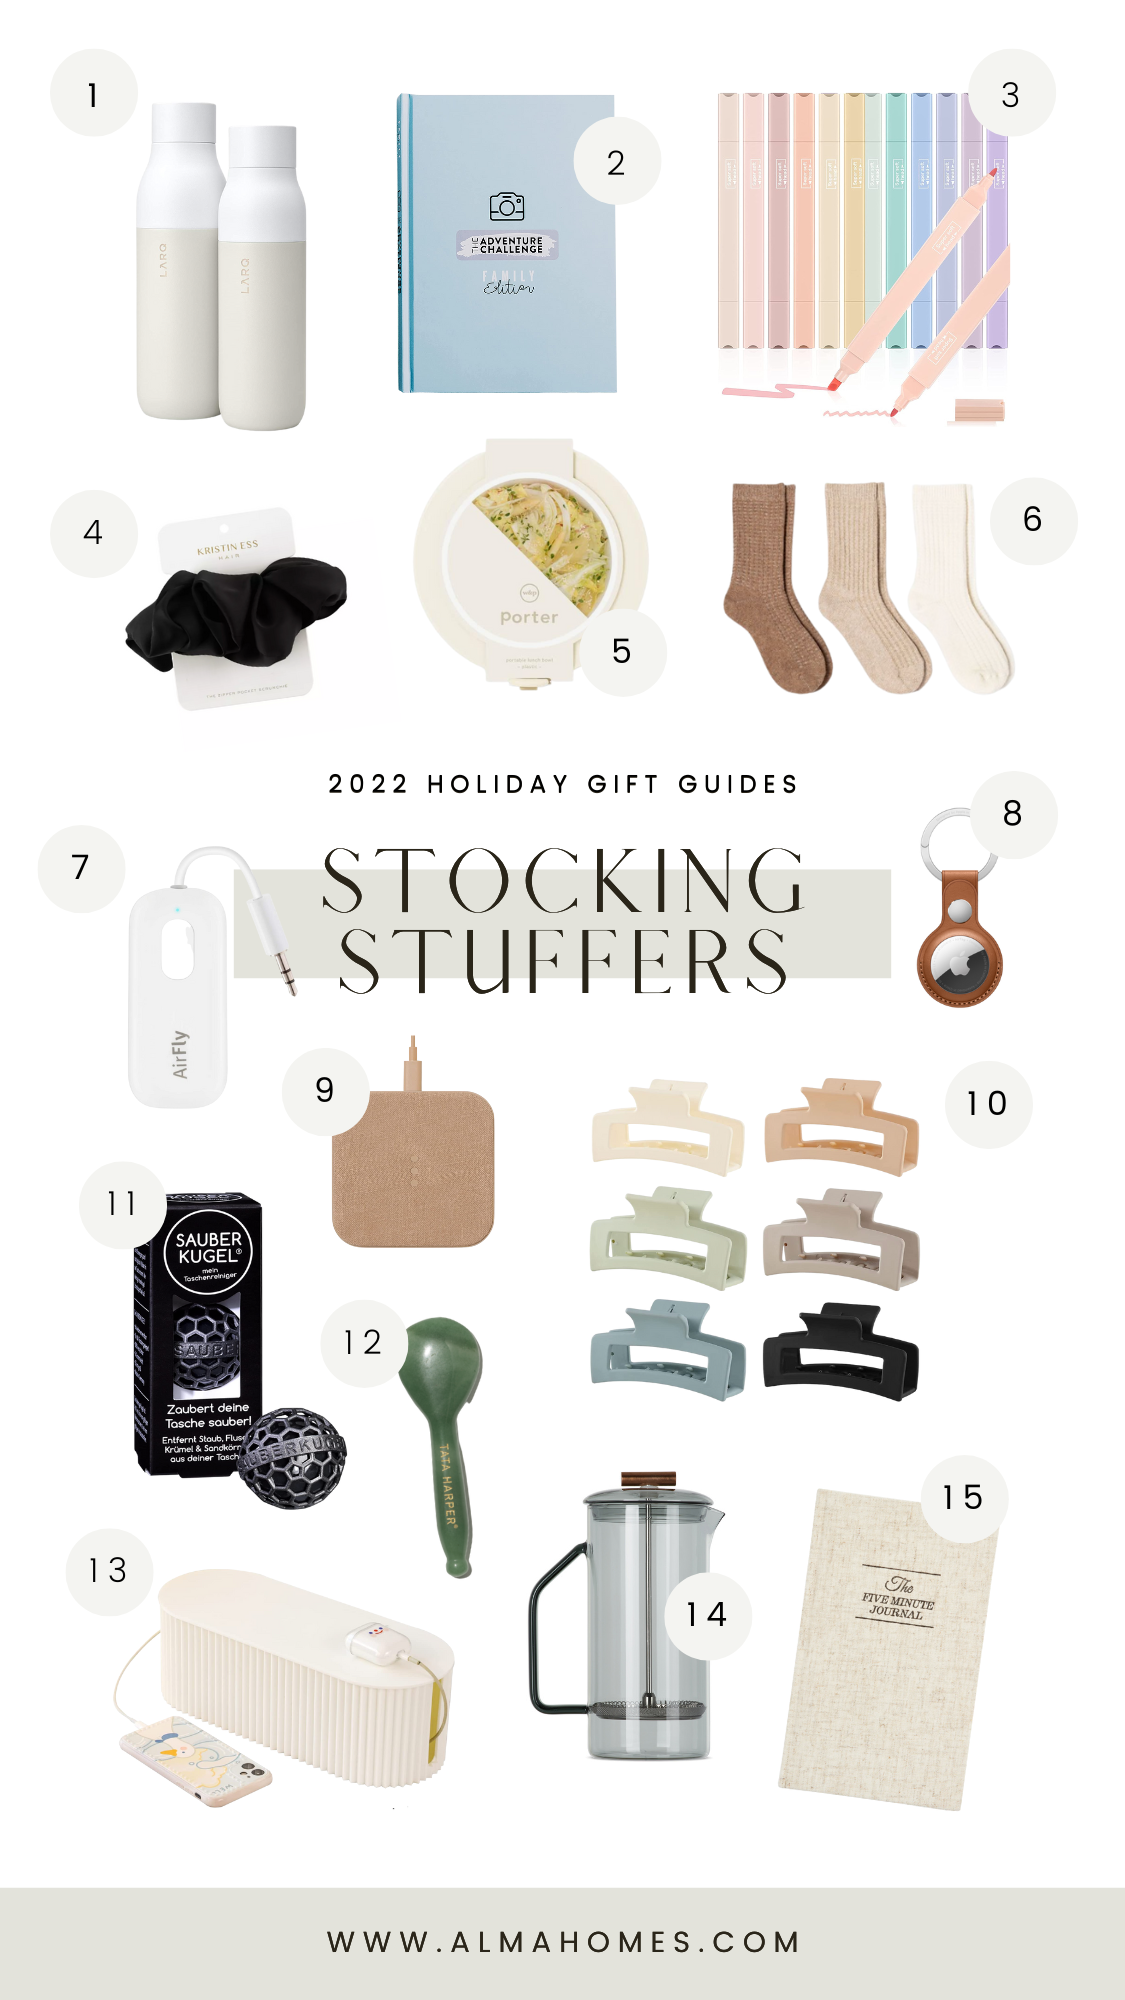 alma-homes-holiday-stocking-stuffer-gift-guide-2022